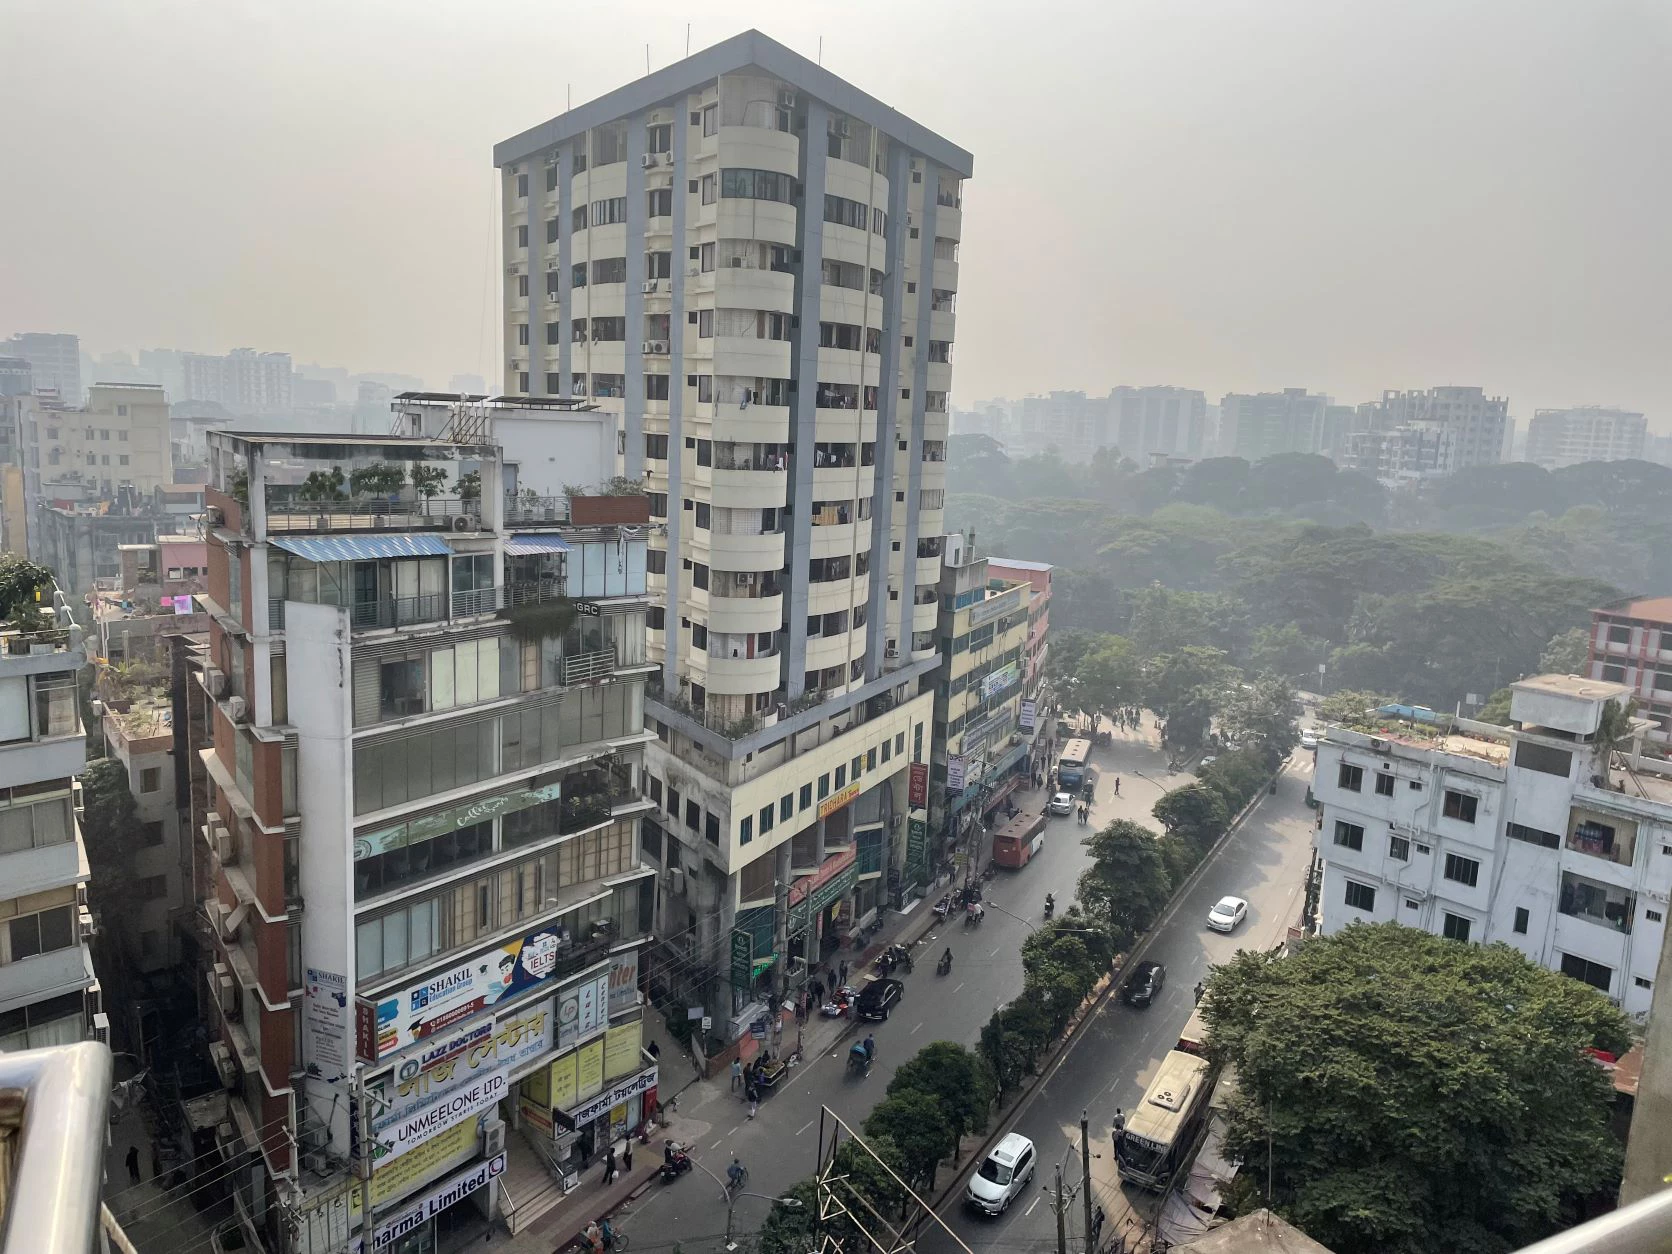 Dhaka is the second most polluted city in the world